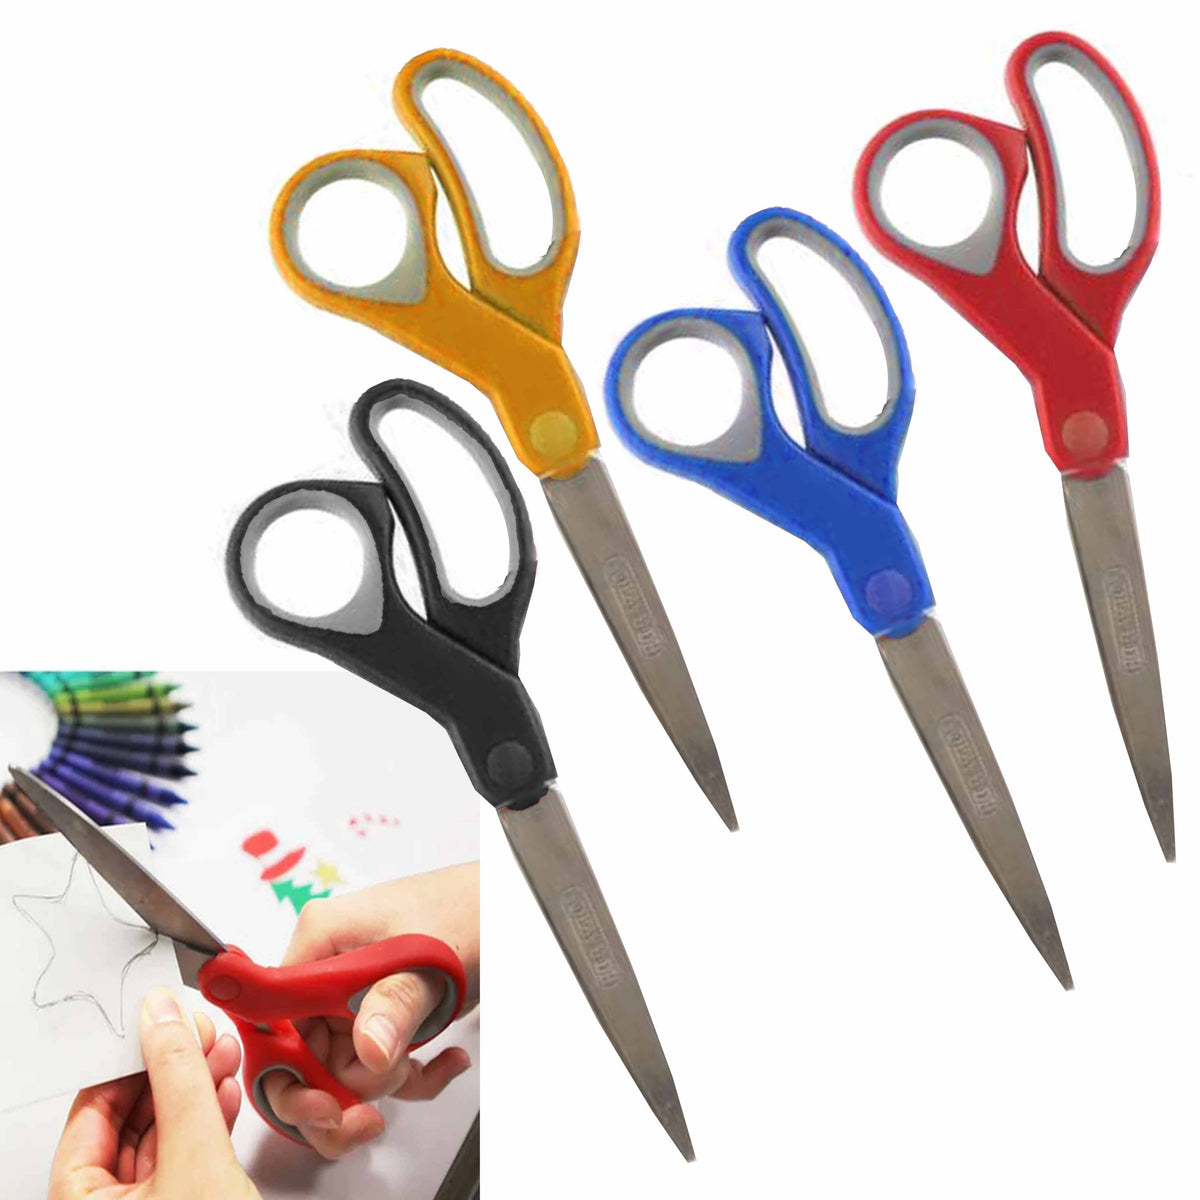  16PCS 8.5 Inch Scissors, Stainless Steel Sharp Blade,  Comfort-Grip Handles, for Office Home School Students Teacher Art CraftPack  of 16. : Arts, Crafts & Sewing